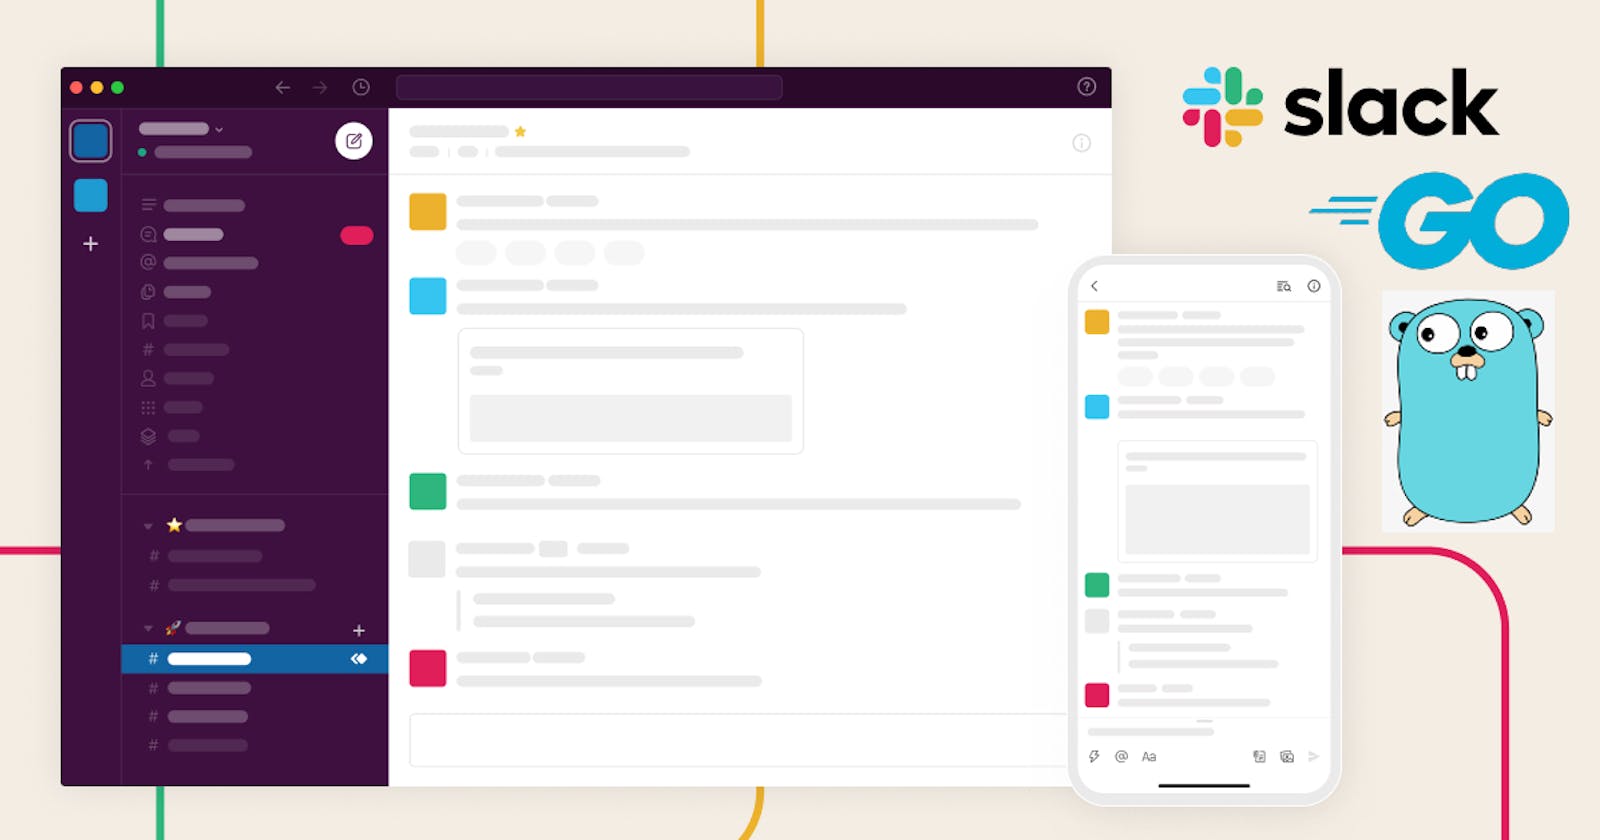 Go: Getting Alerts into the Slack Channel